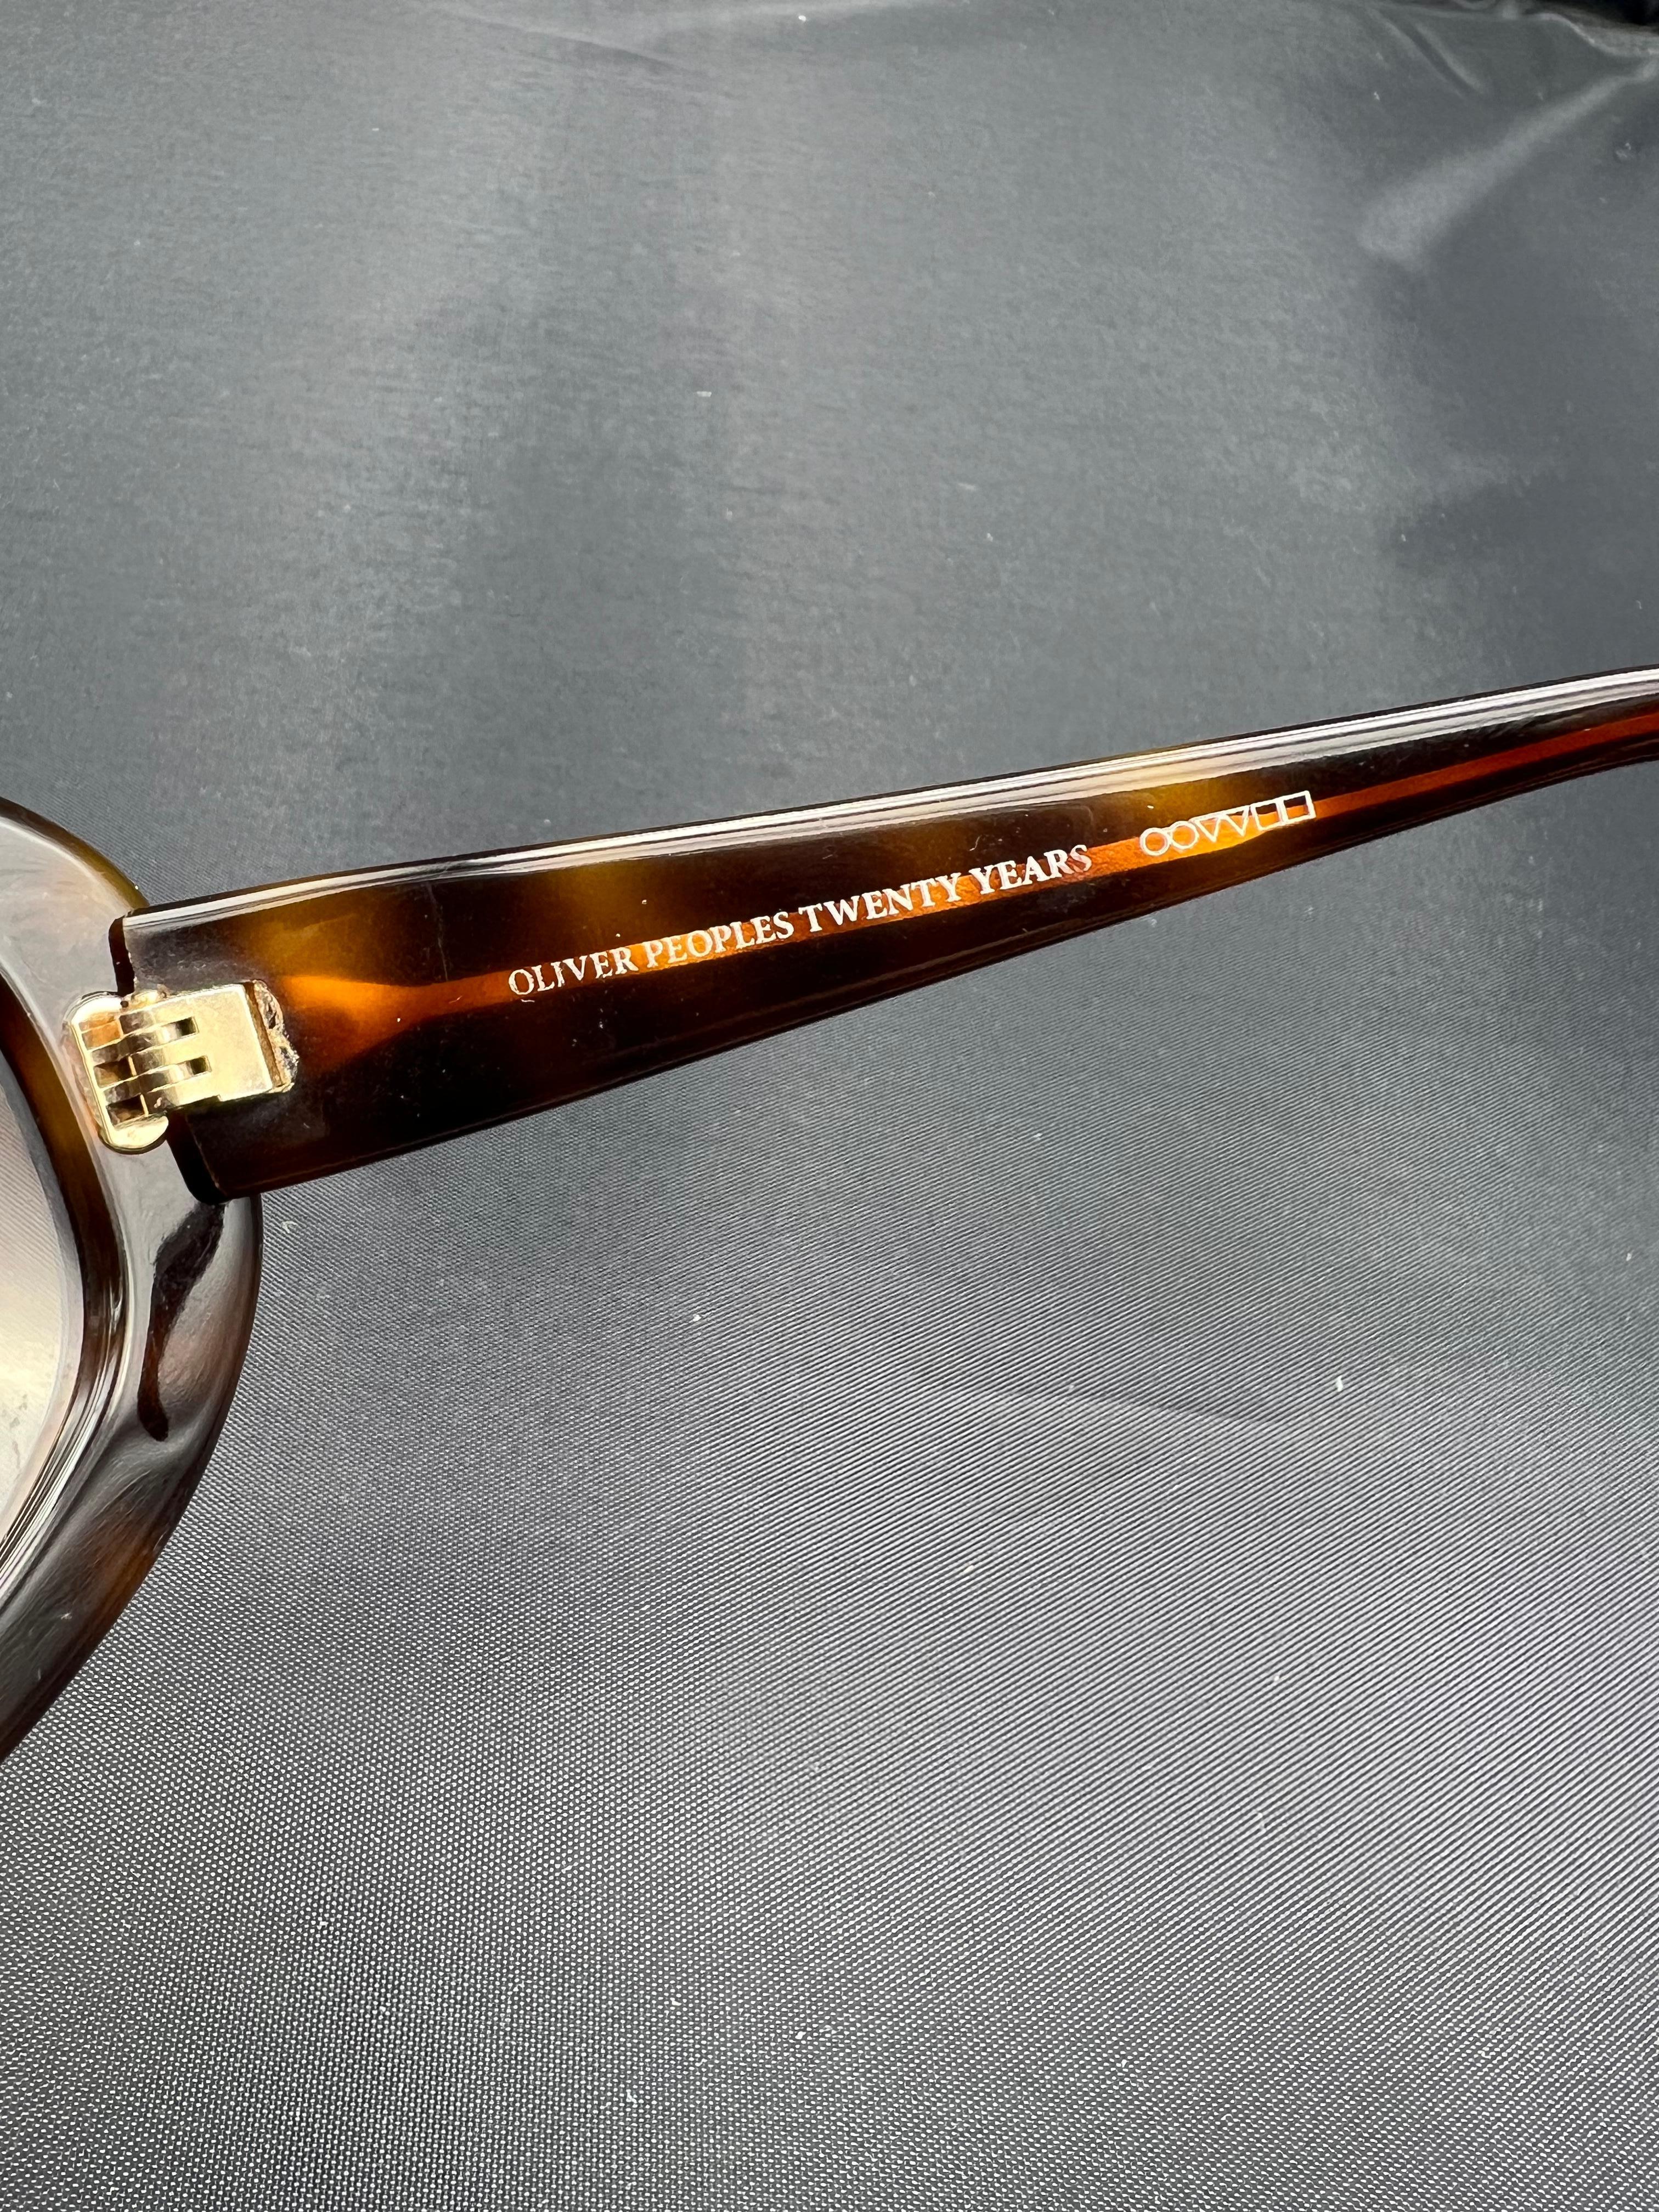 Oliver Peoples Twenty Years Paramount Limited Edition Brown Oval Sunglasses For Sale 1